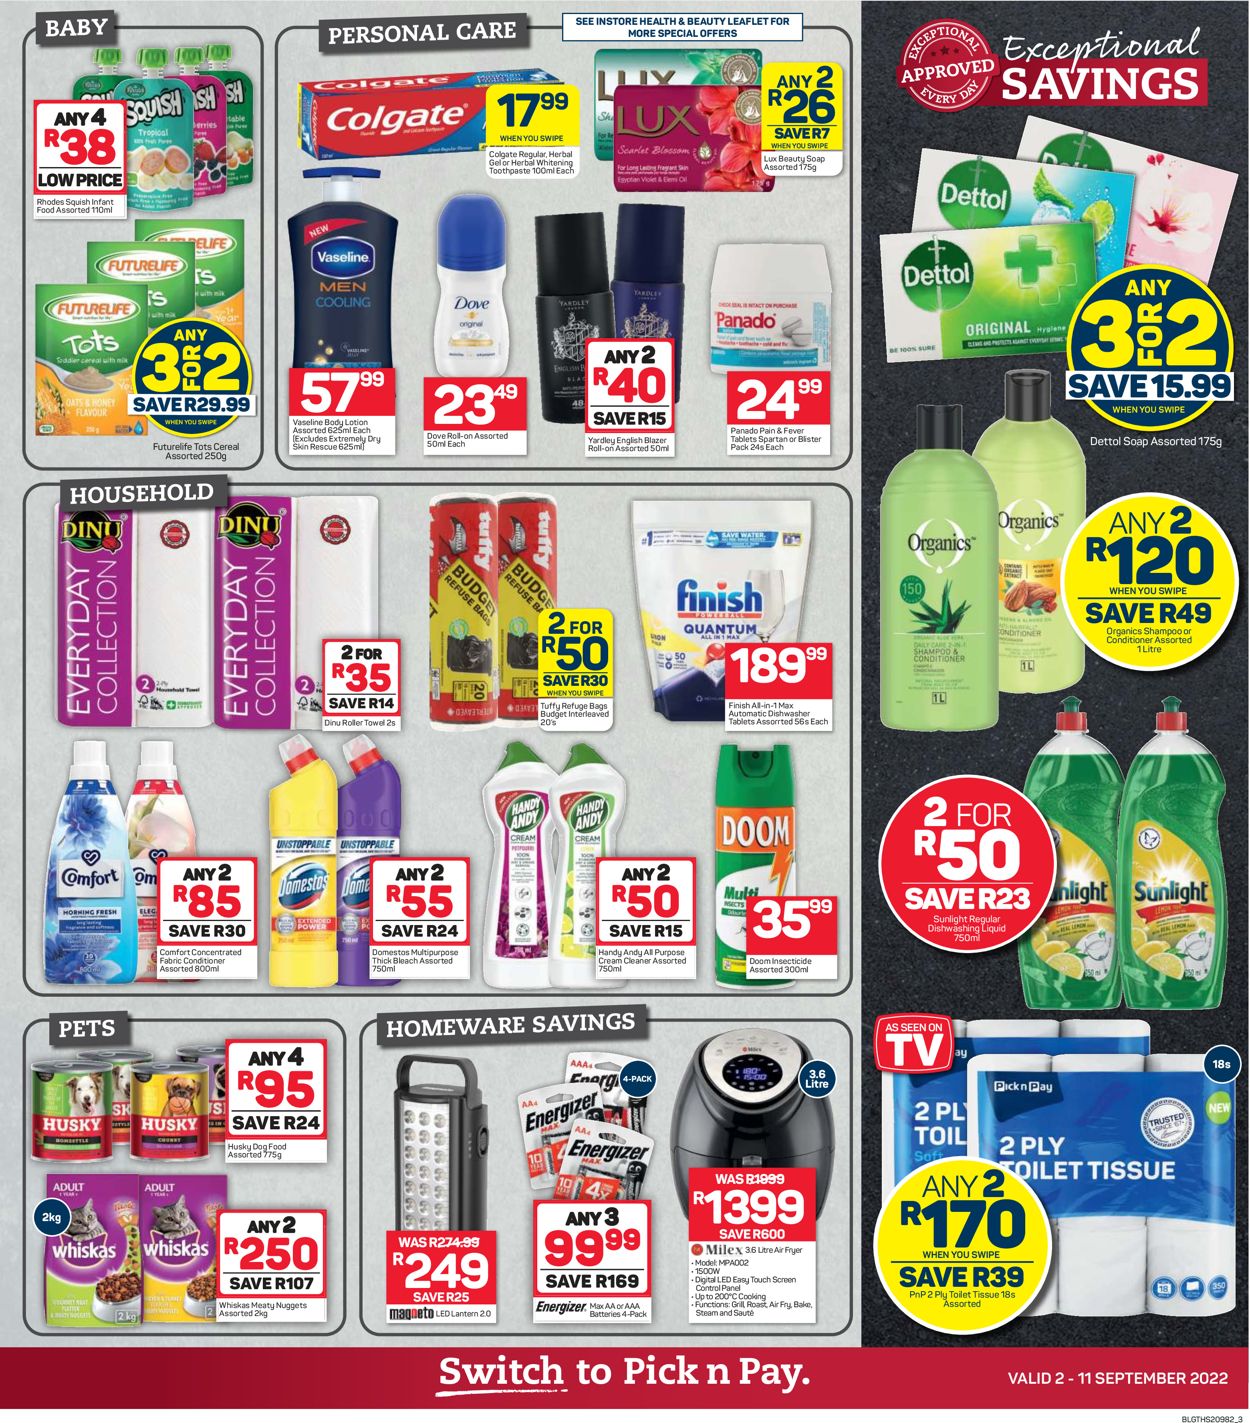 Pick n Pay Catalogue - 2022/09/02-2022/09/11 (Page 4)